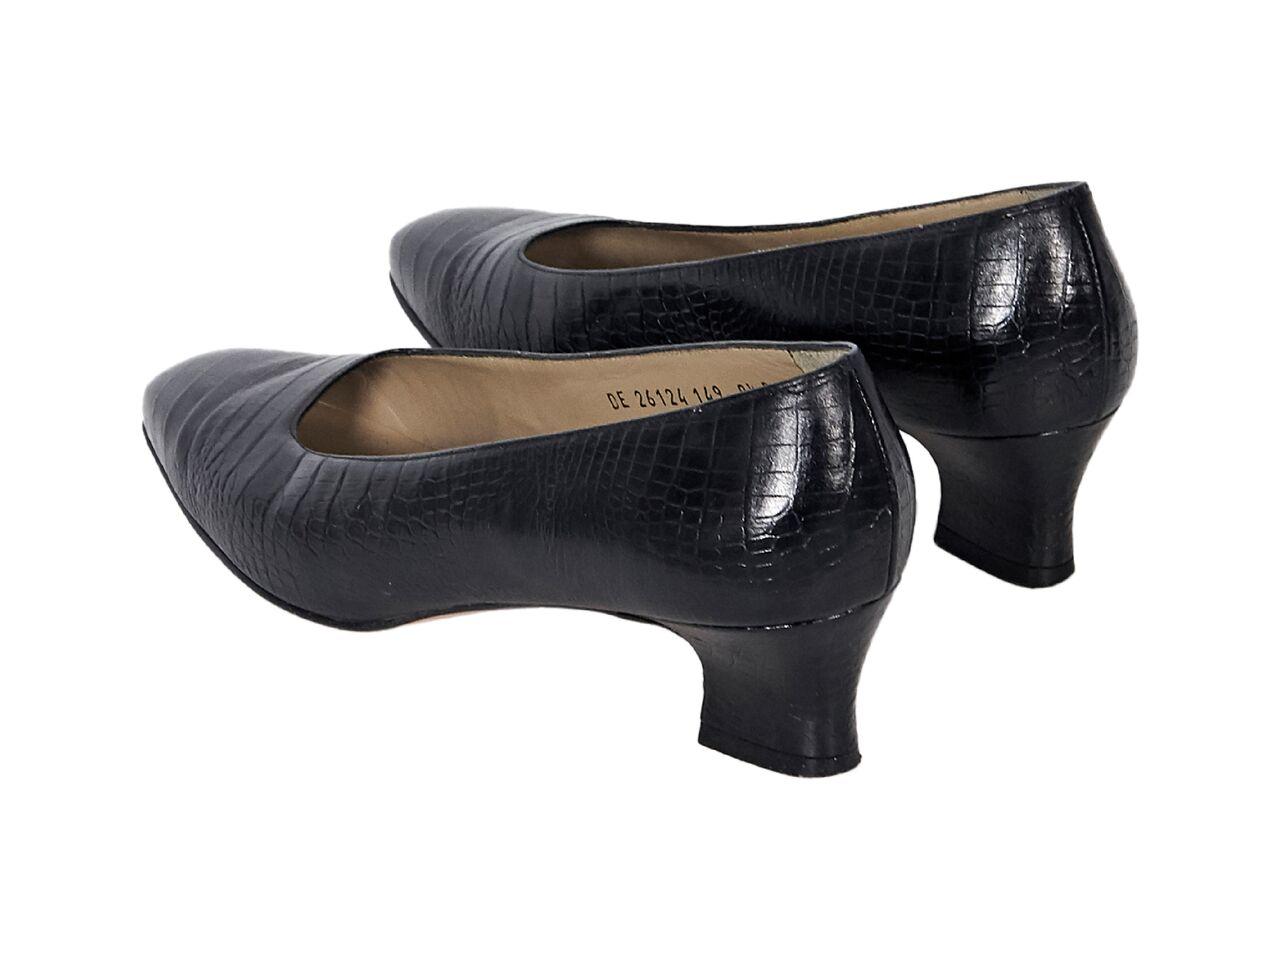 Product details:  Black embossed leather kitten heels by Salvatore Ferragamo.  Rounded square toe.  Slip-on style.  2